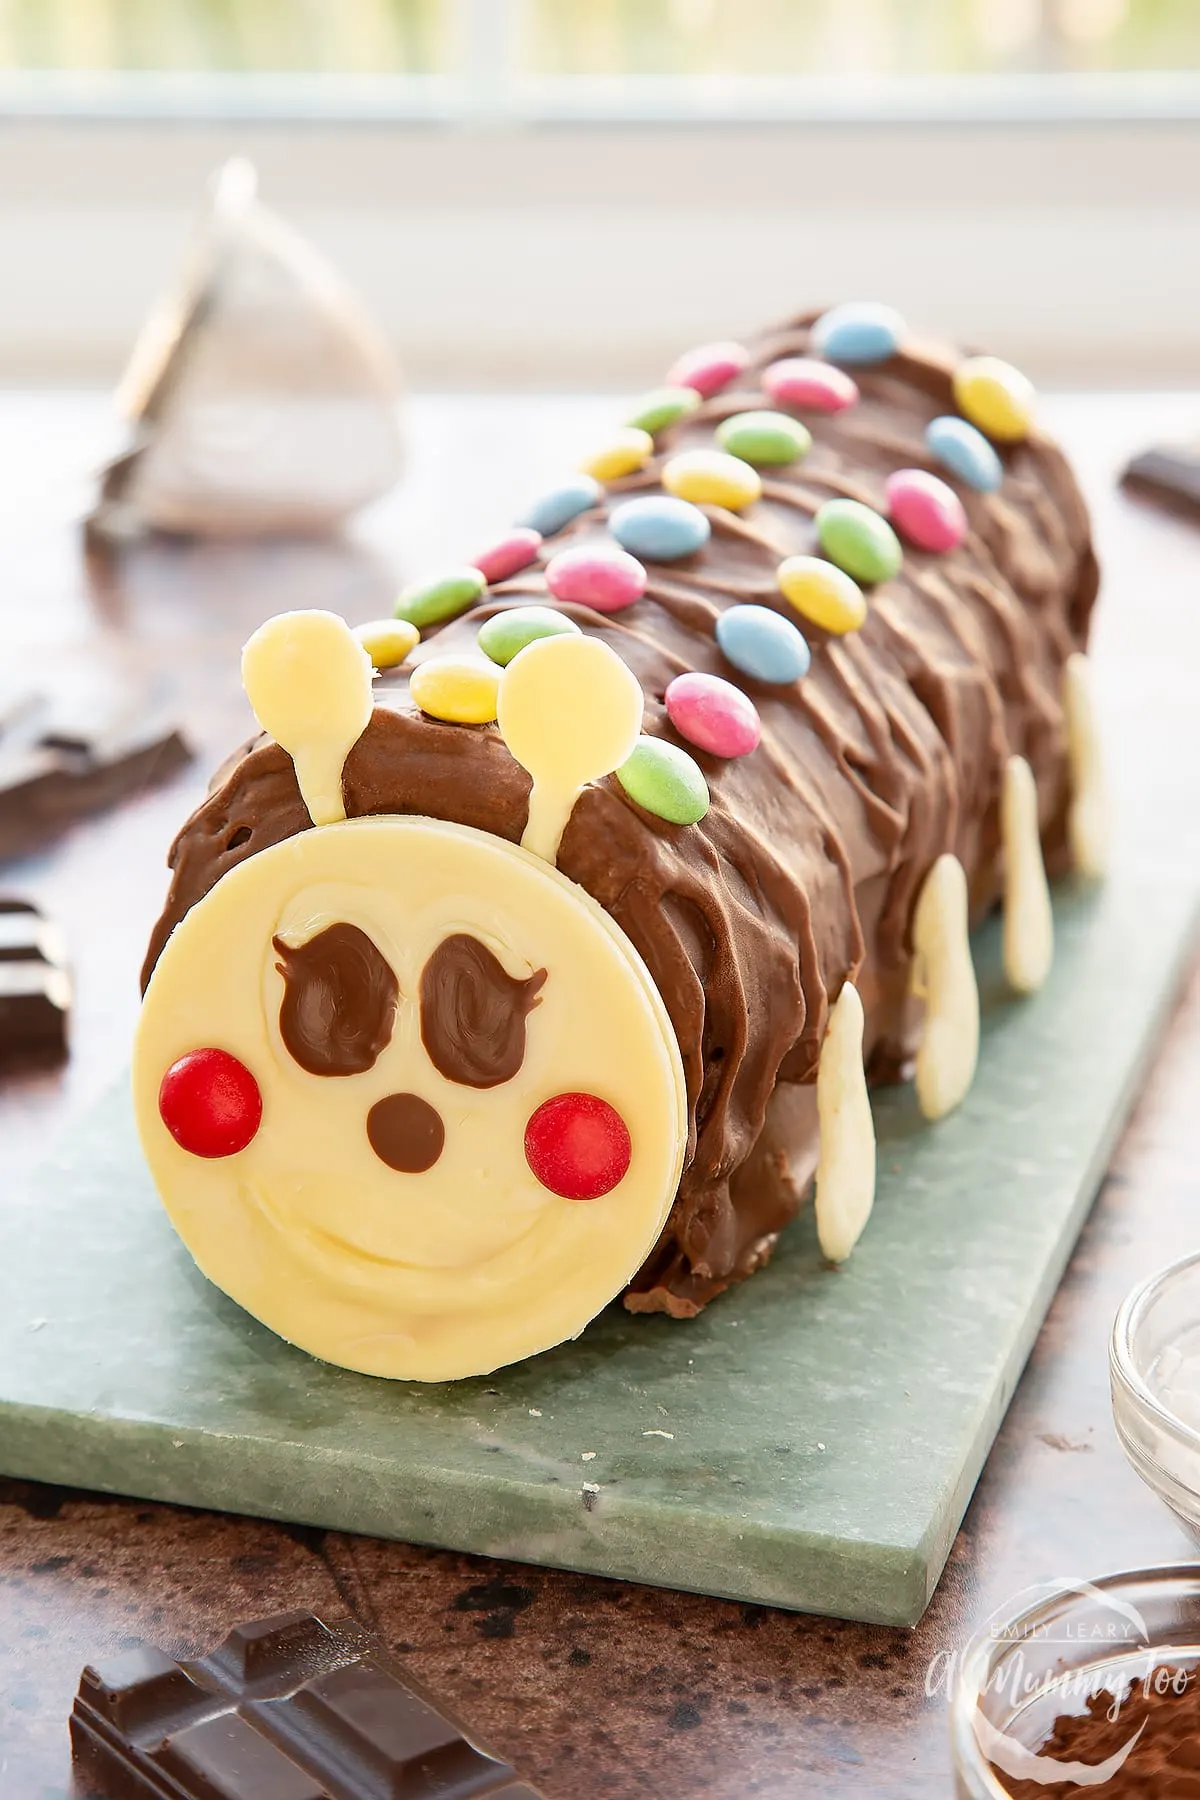 A smiling caterpillar cake with chocolate frosting.